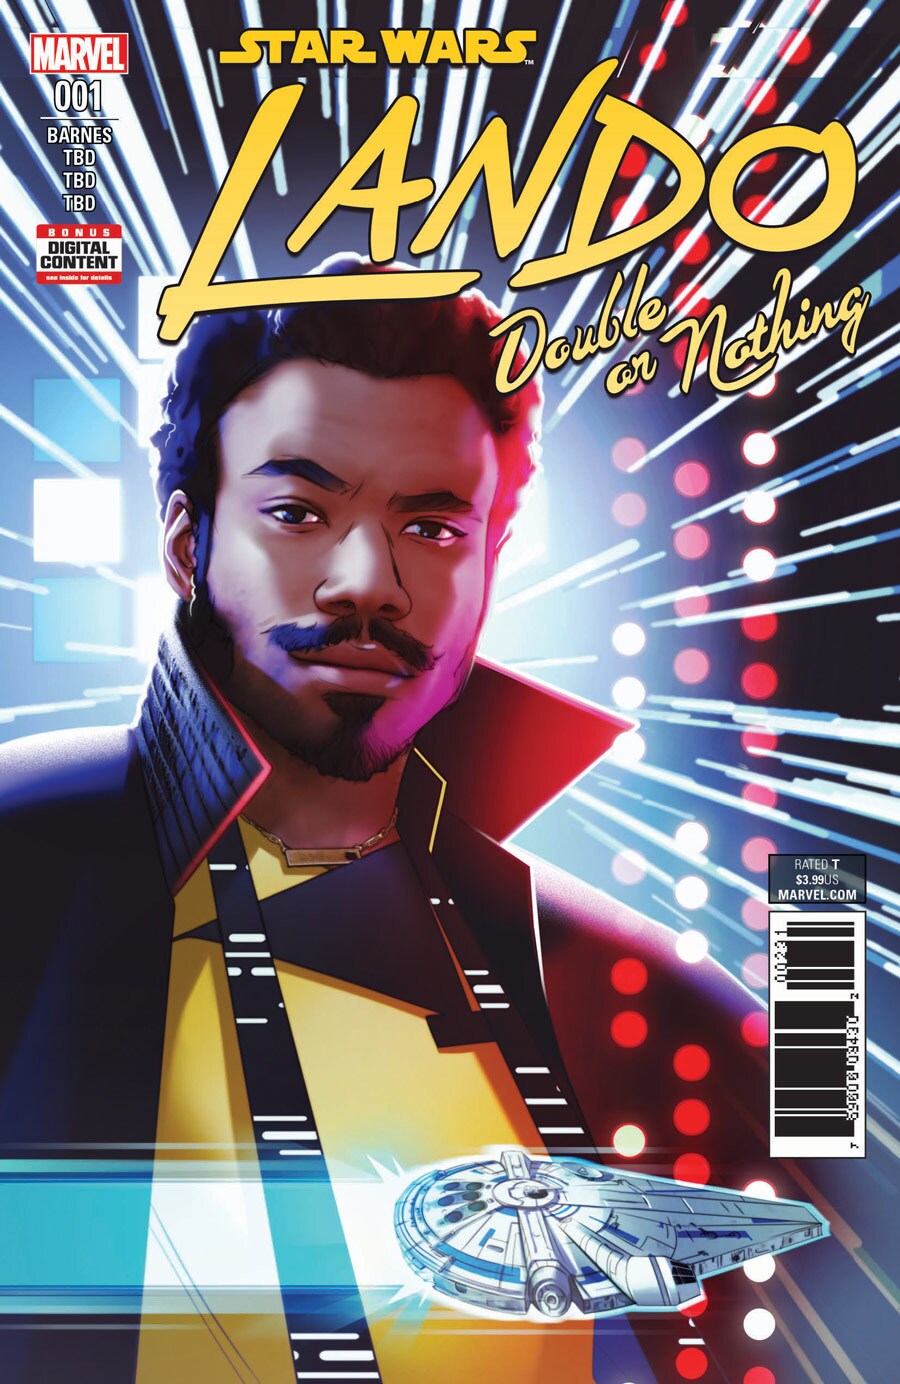 The cover of Star Wars: Lando: Double or Nothing issue #1. It features Lando and the Millennium Falcon.